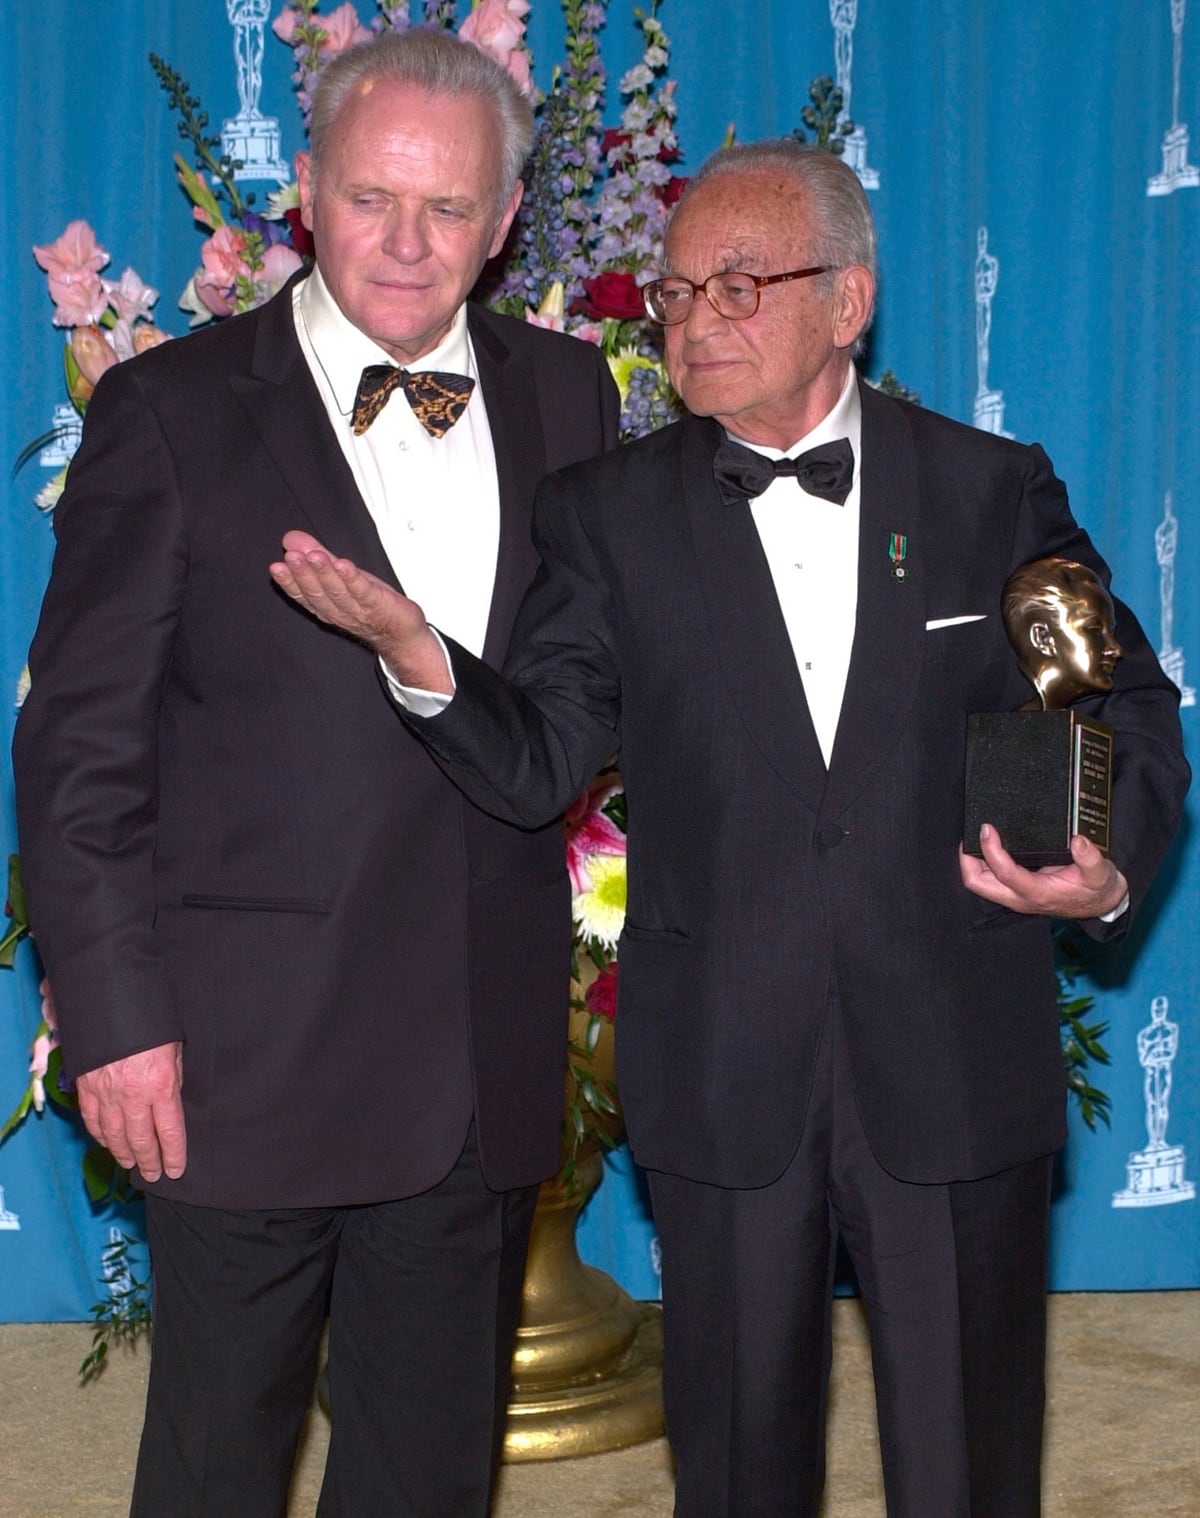 Presenter Sir Anthony Hopkins and Dino De Laurentiis pose for photos at the 73rd Annual Academy Awards ceremony